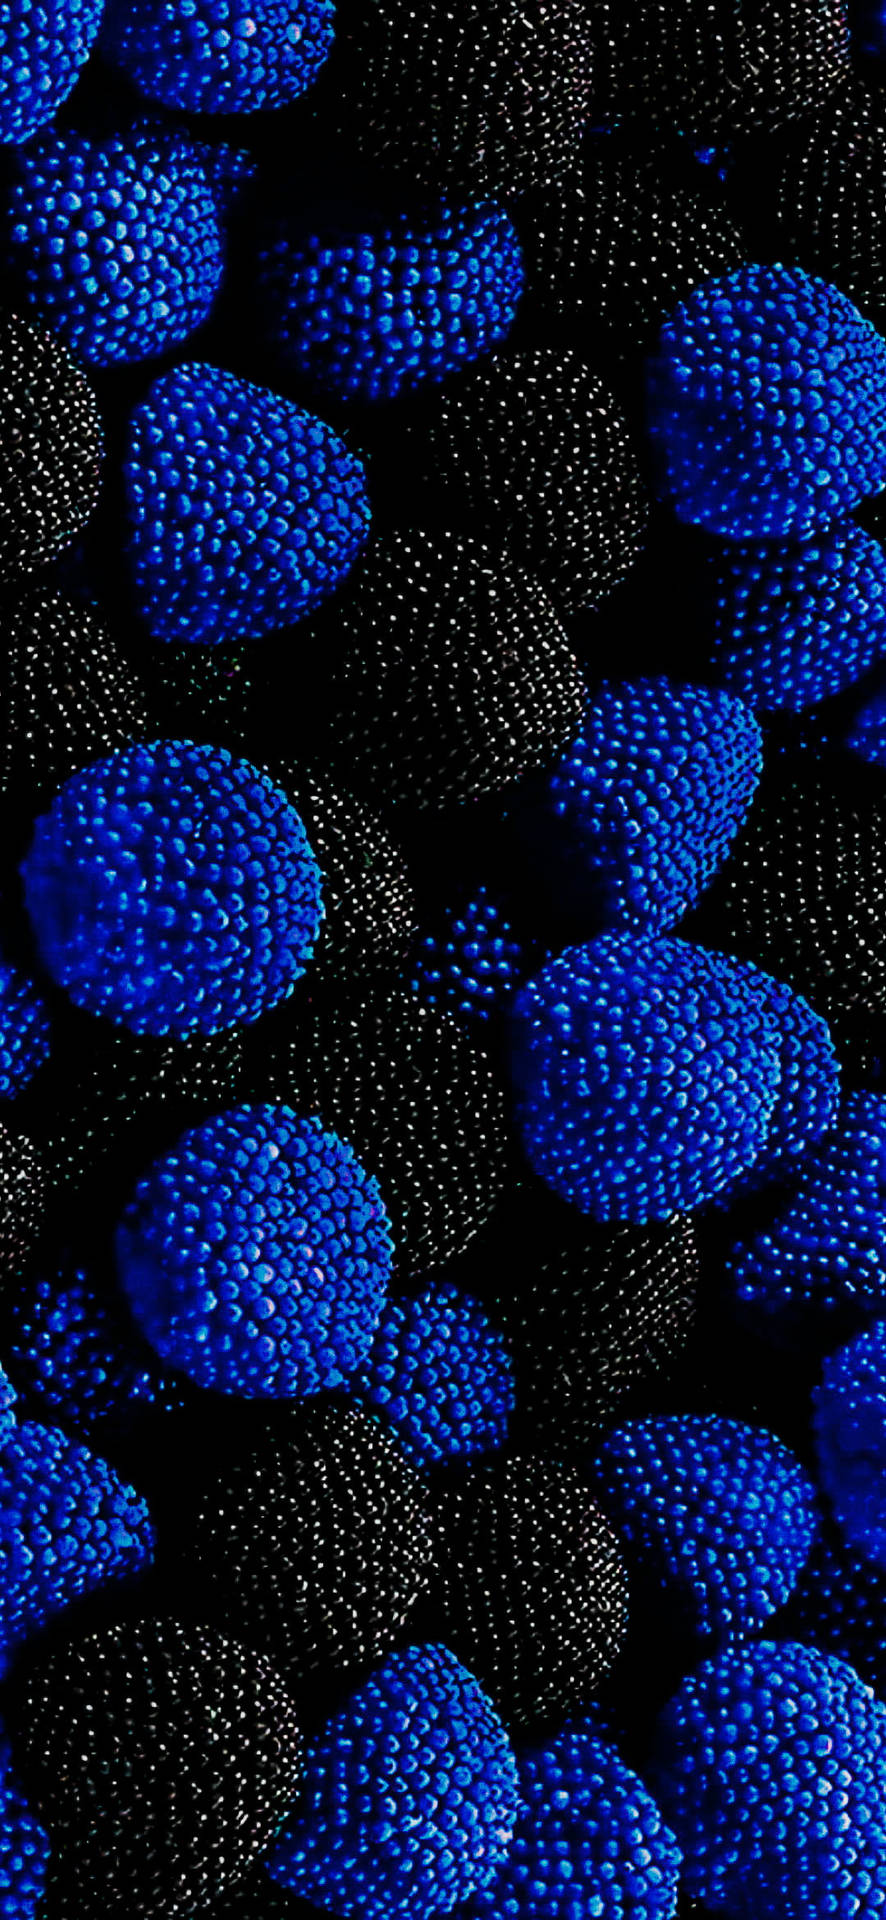 Blue And Black Berries On Samsung Full Hd